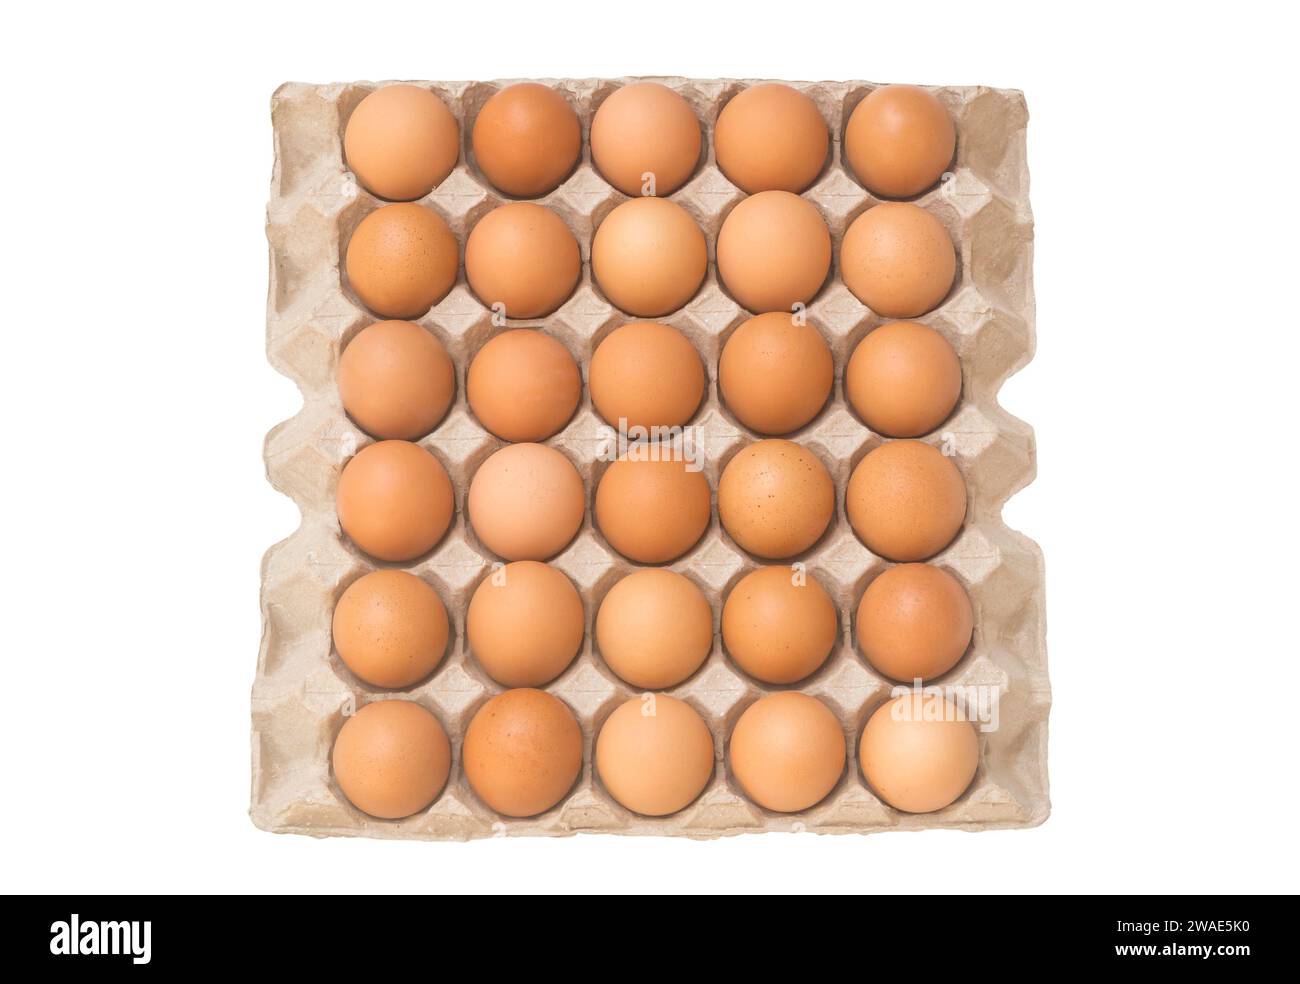 Top view of eggs in open carton or paper tray is isolated on white background with clipping path. Stock Photo